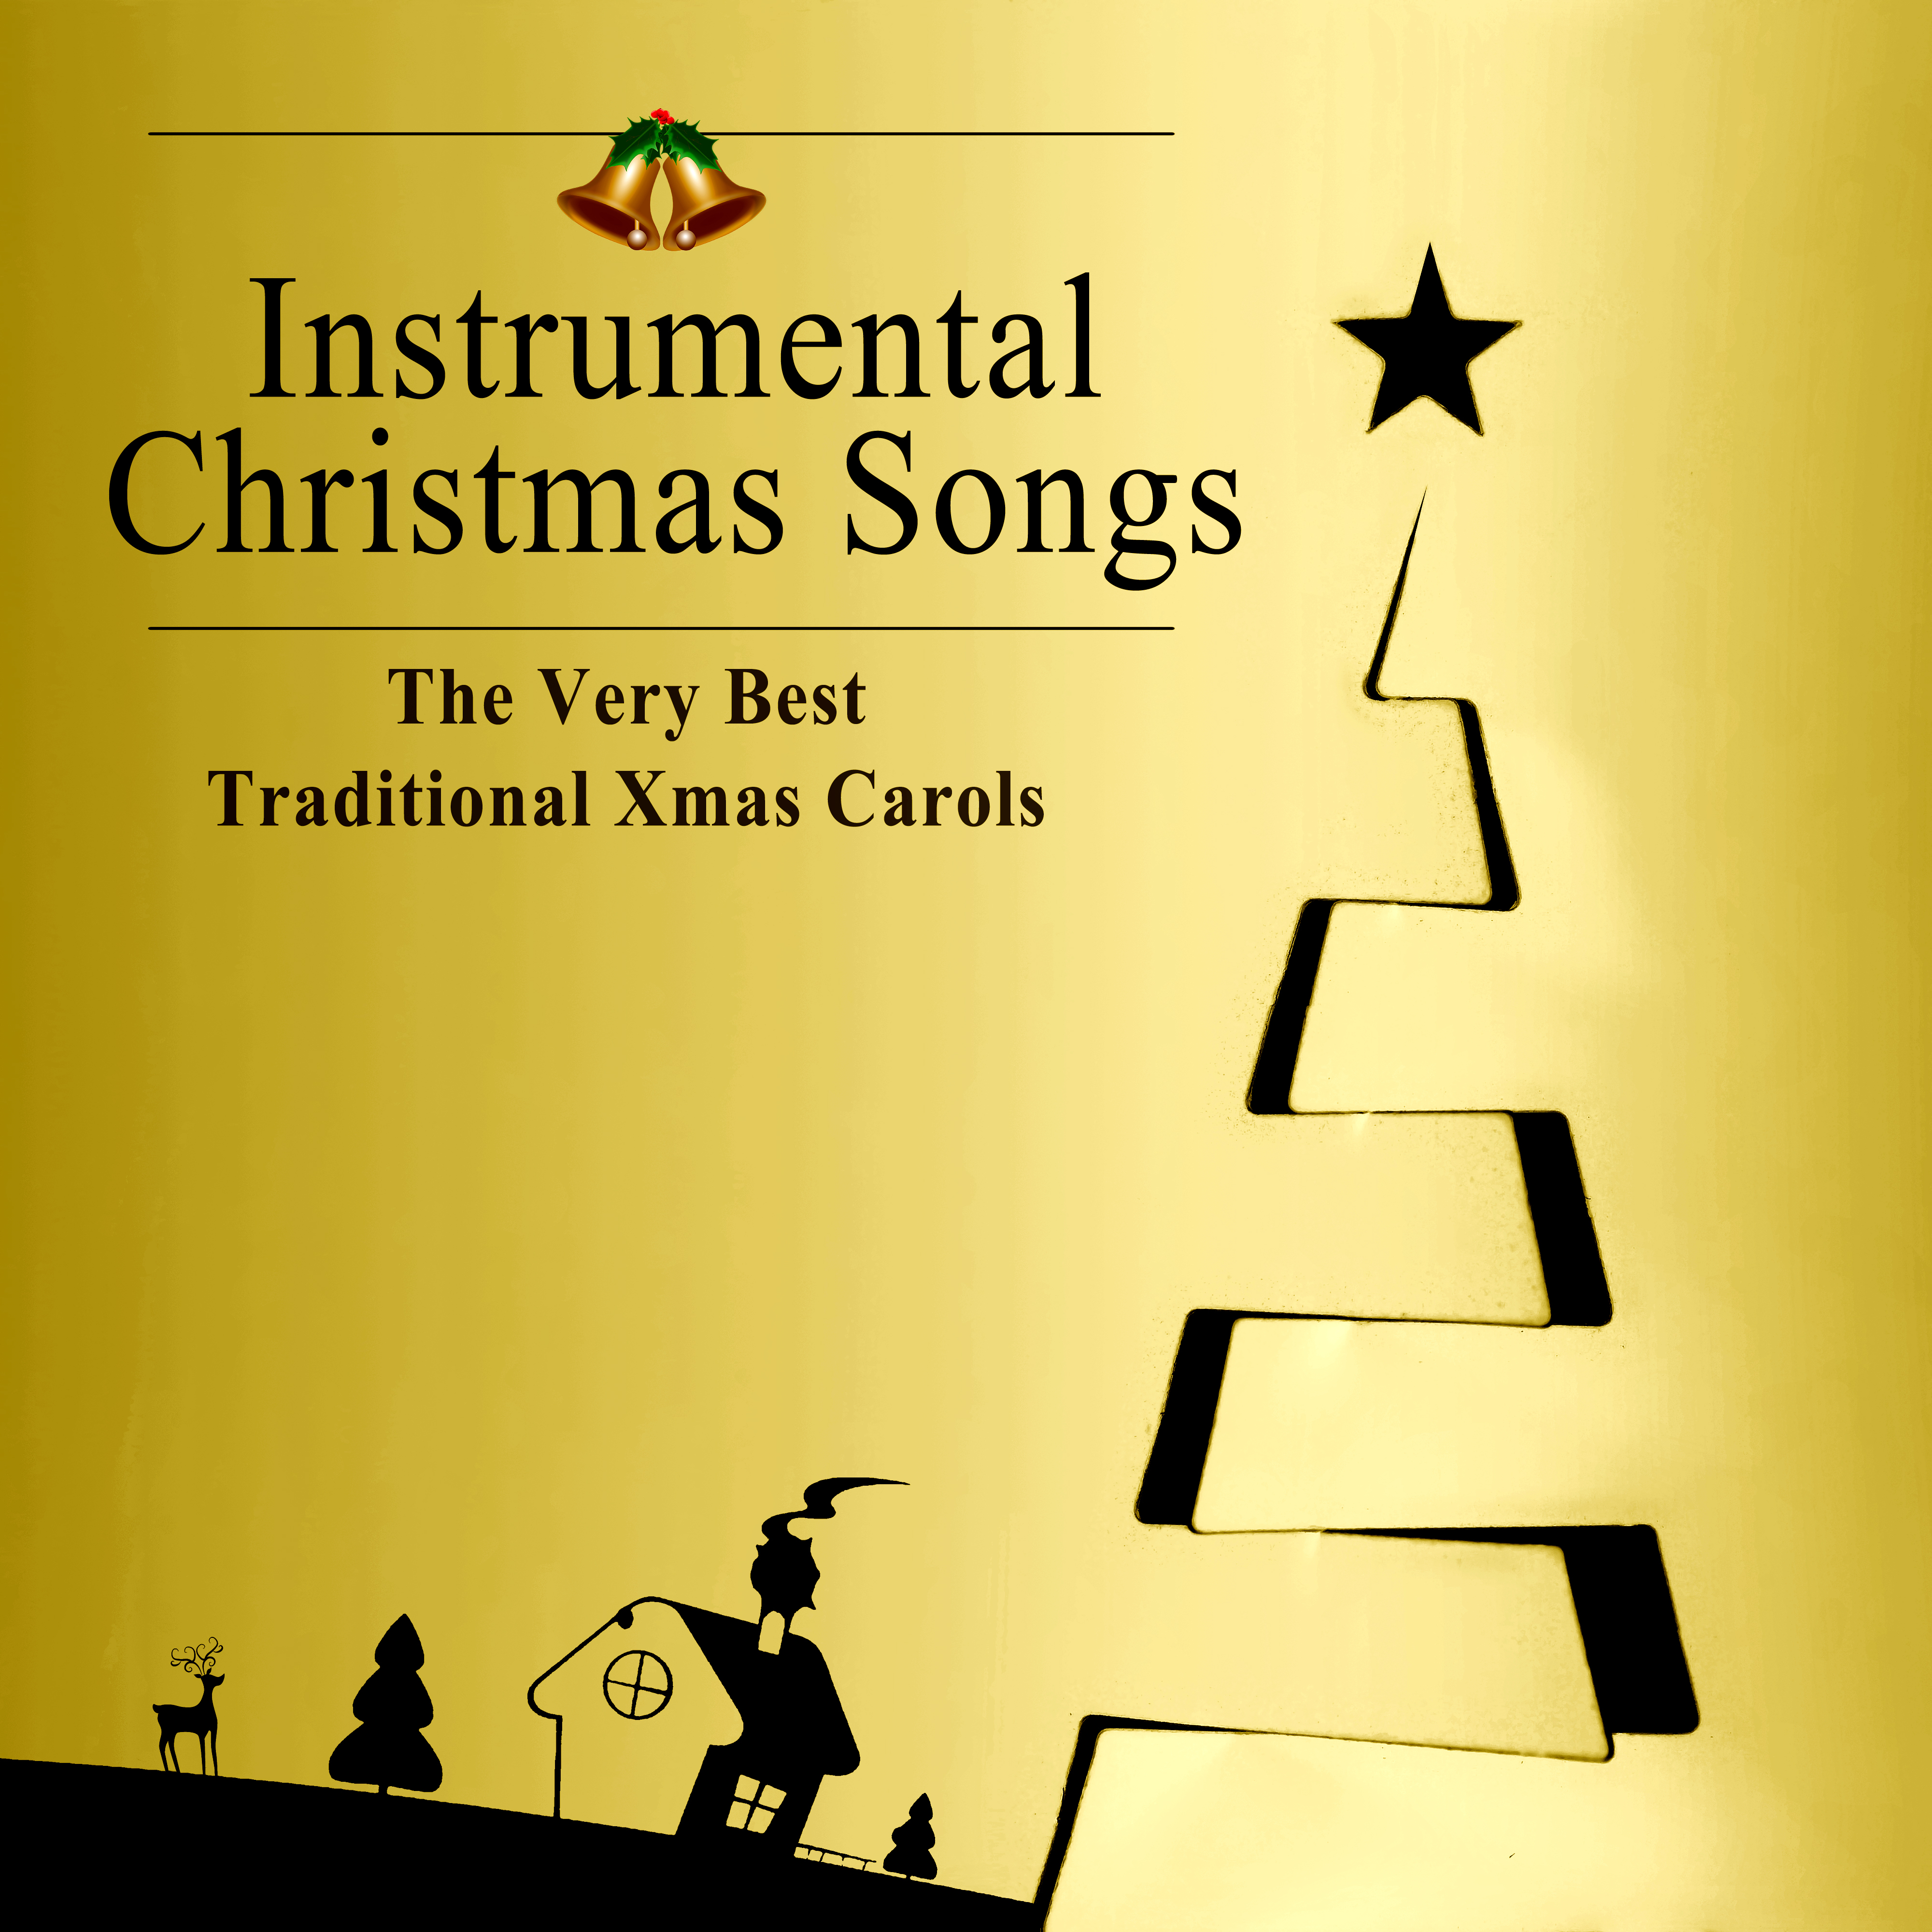 Christmas Songs – The Very Best Traditional Xmas Carols and Beautiful Instrumental Music for All, Magic Christmas Time